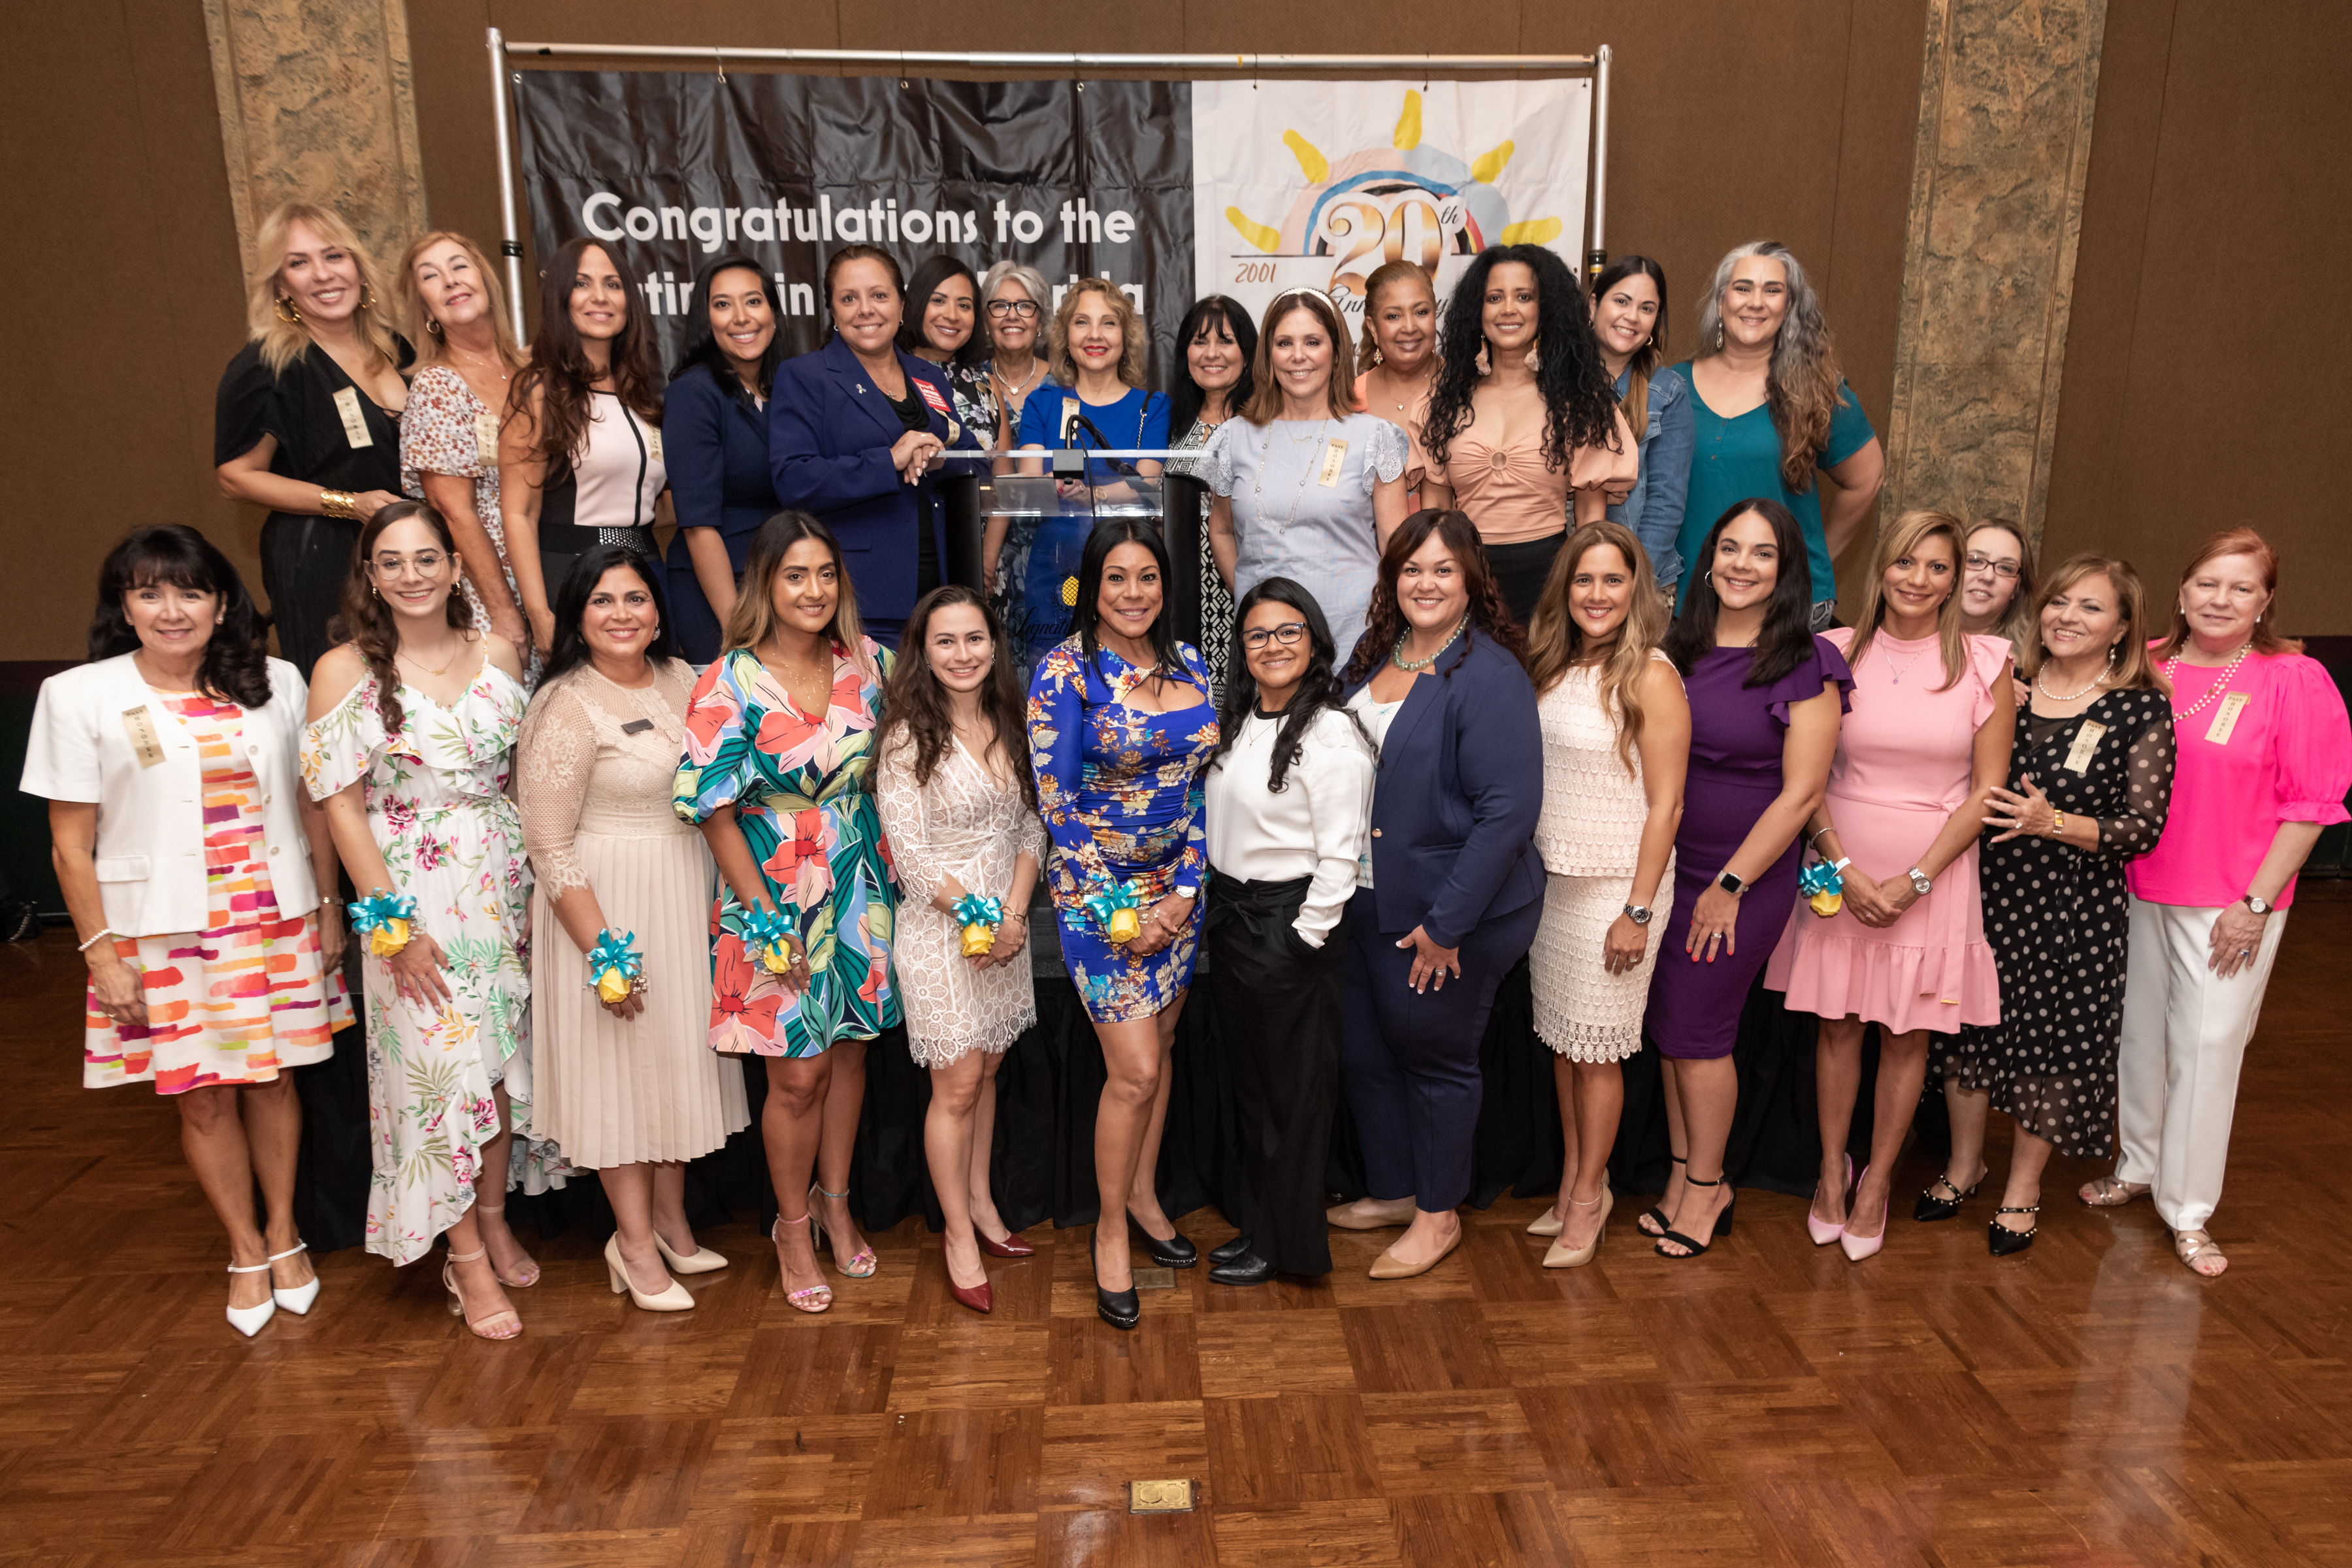 Dean Luna (front row, fifth from right) with her fellow current and past honorees